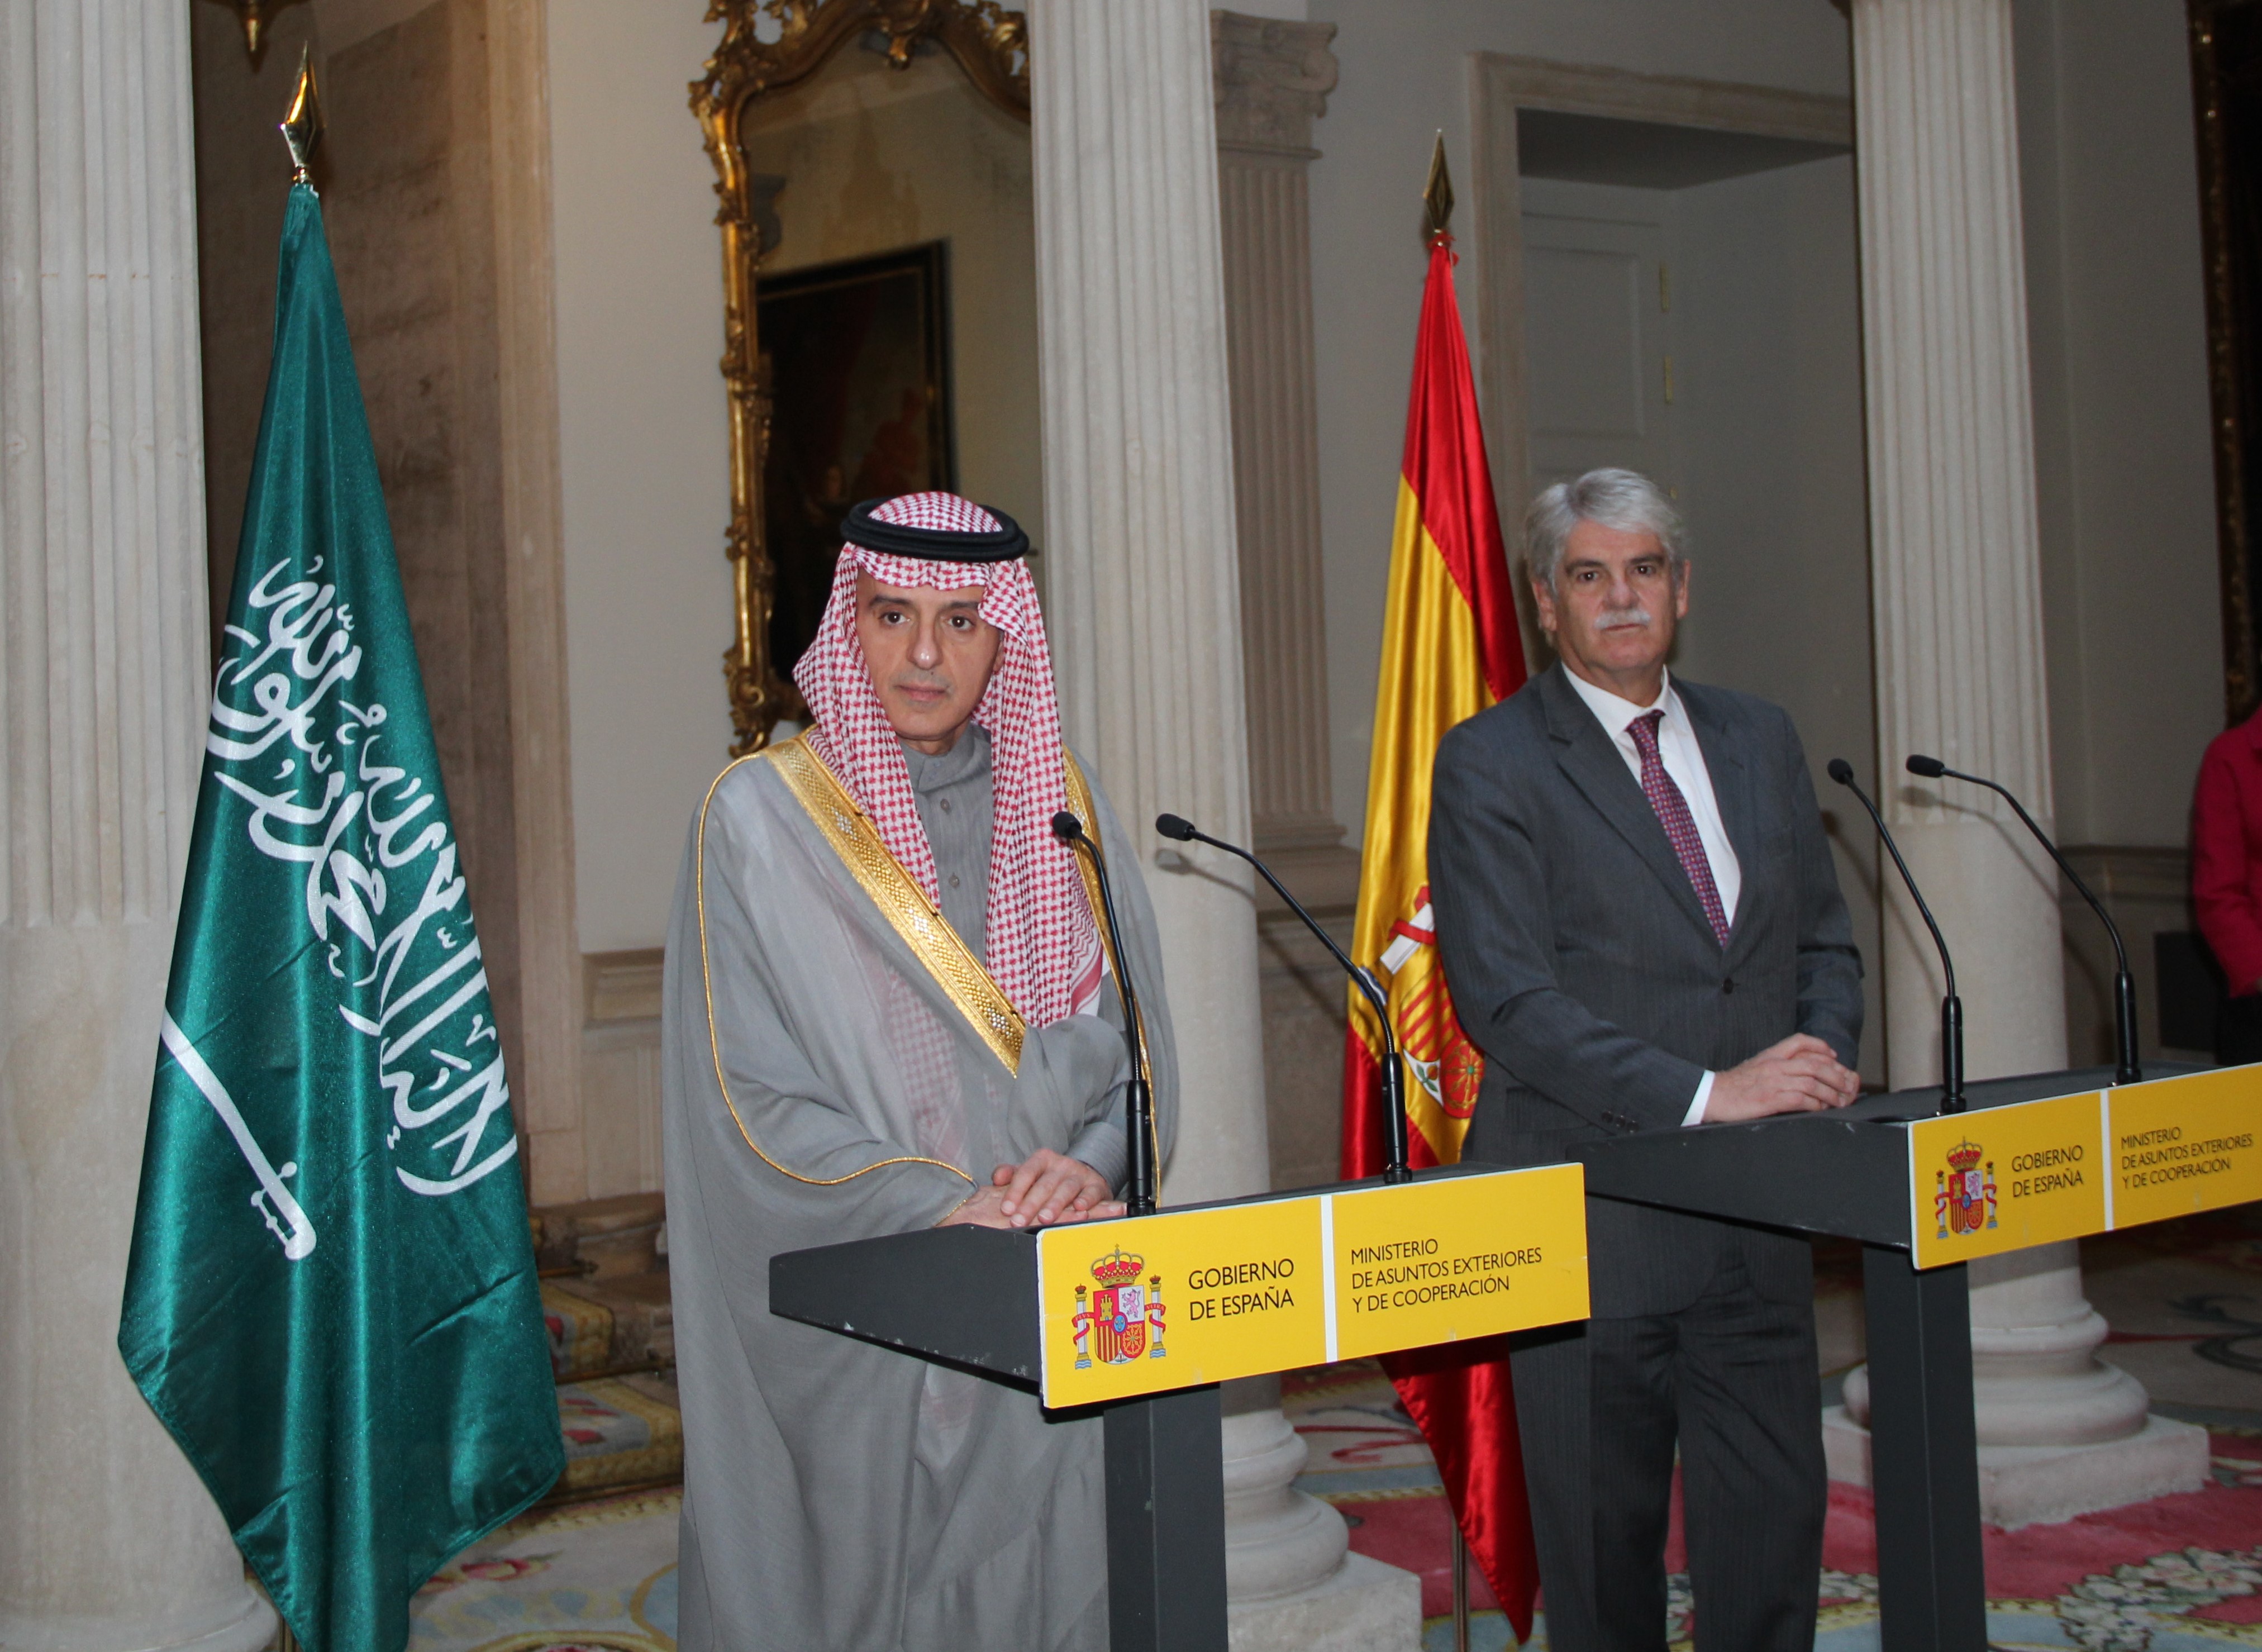 Saudi Foreign Minister Adel Al-Jubeir and his Spanish counterpart Alfonso Dastis at a joint news conference